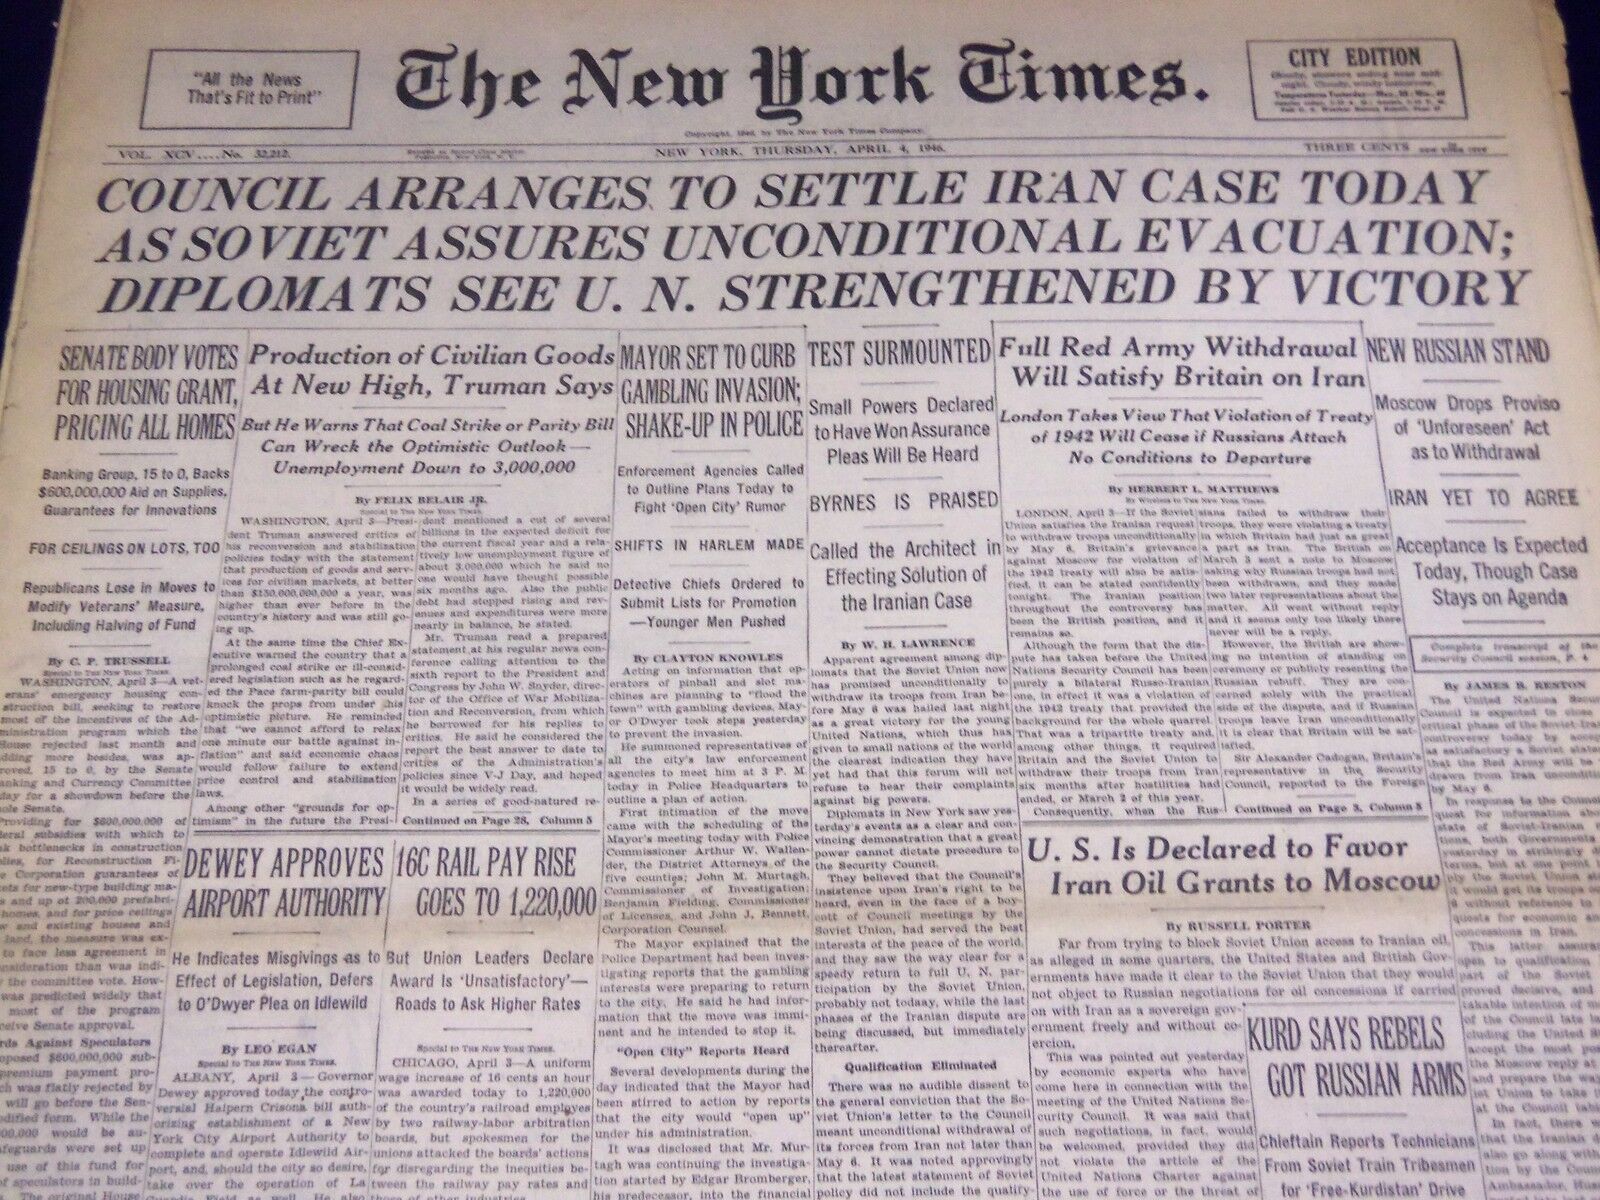 1946 APRIL 4 NEW YORK TIMES COUNCIL ARRANGES TO SETTLE IRAN CASE TODAY - NT 2339